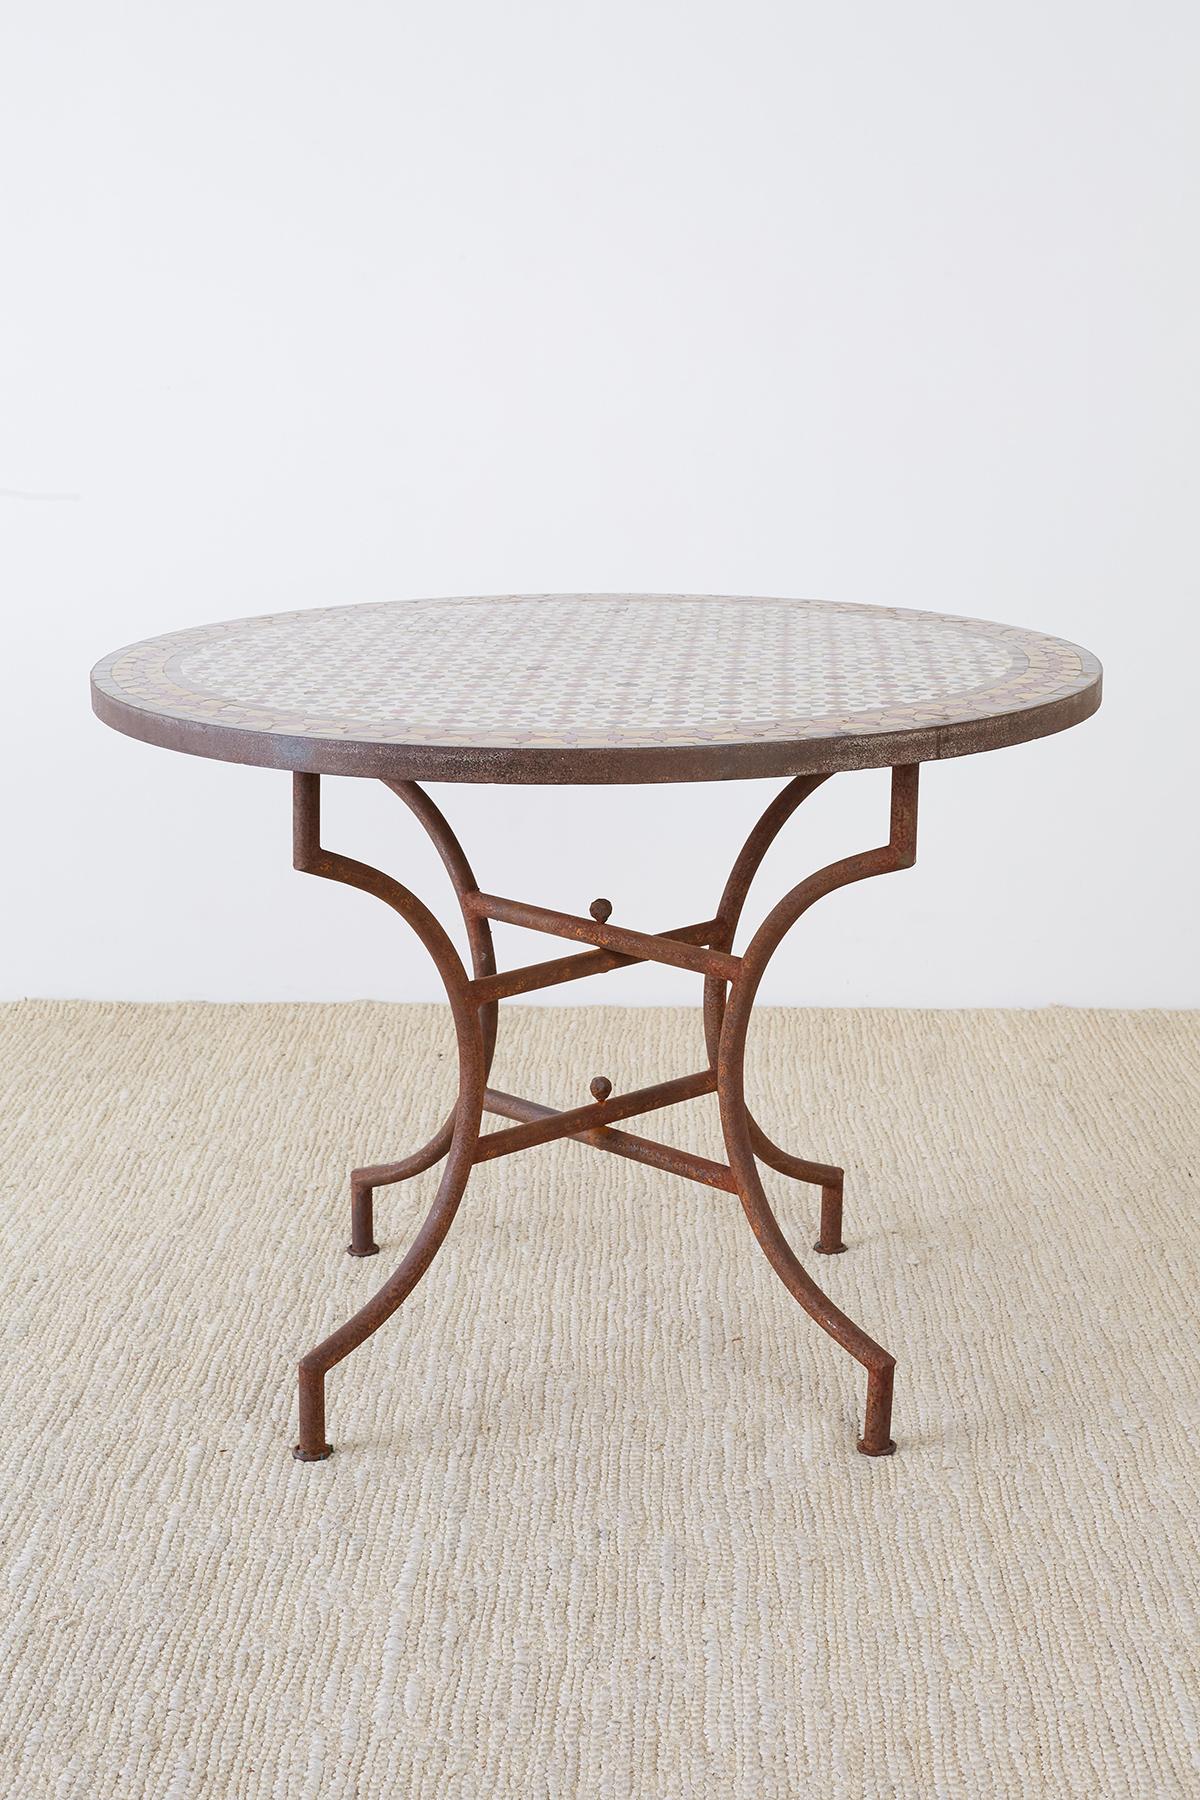 spanish tile dining table